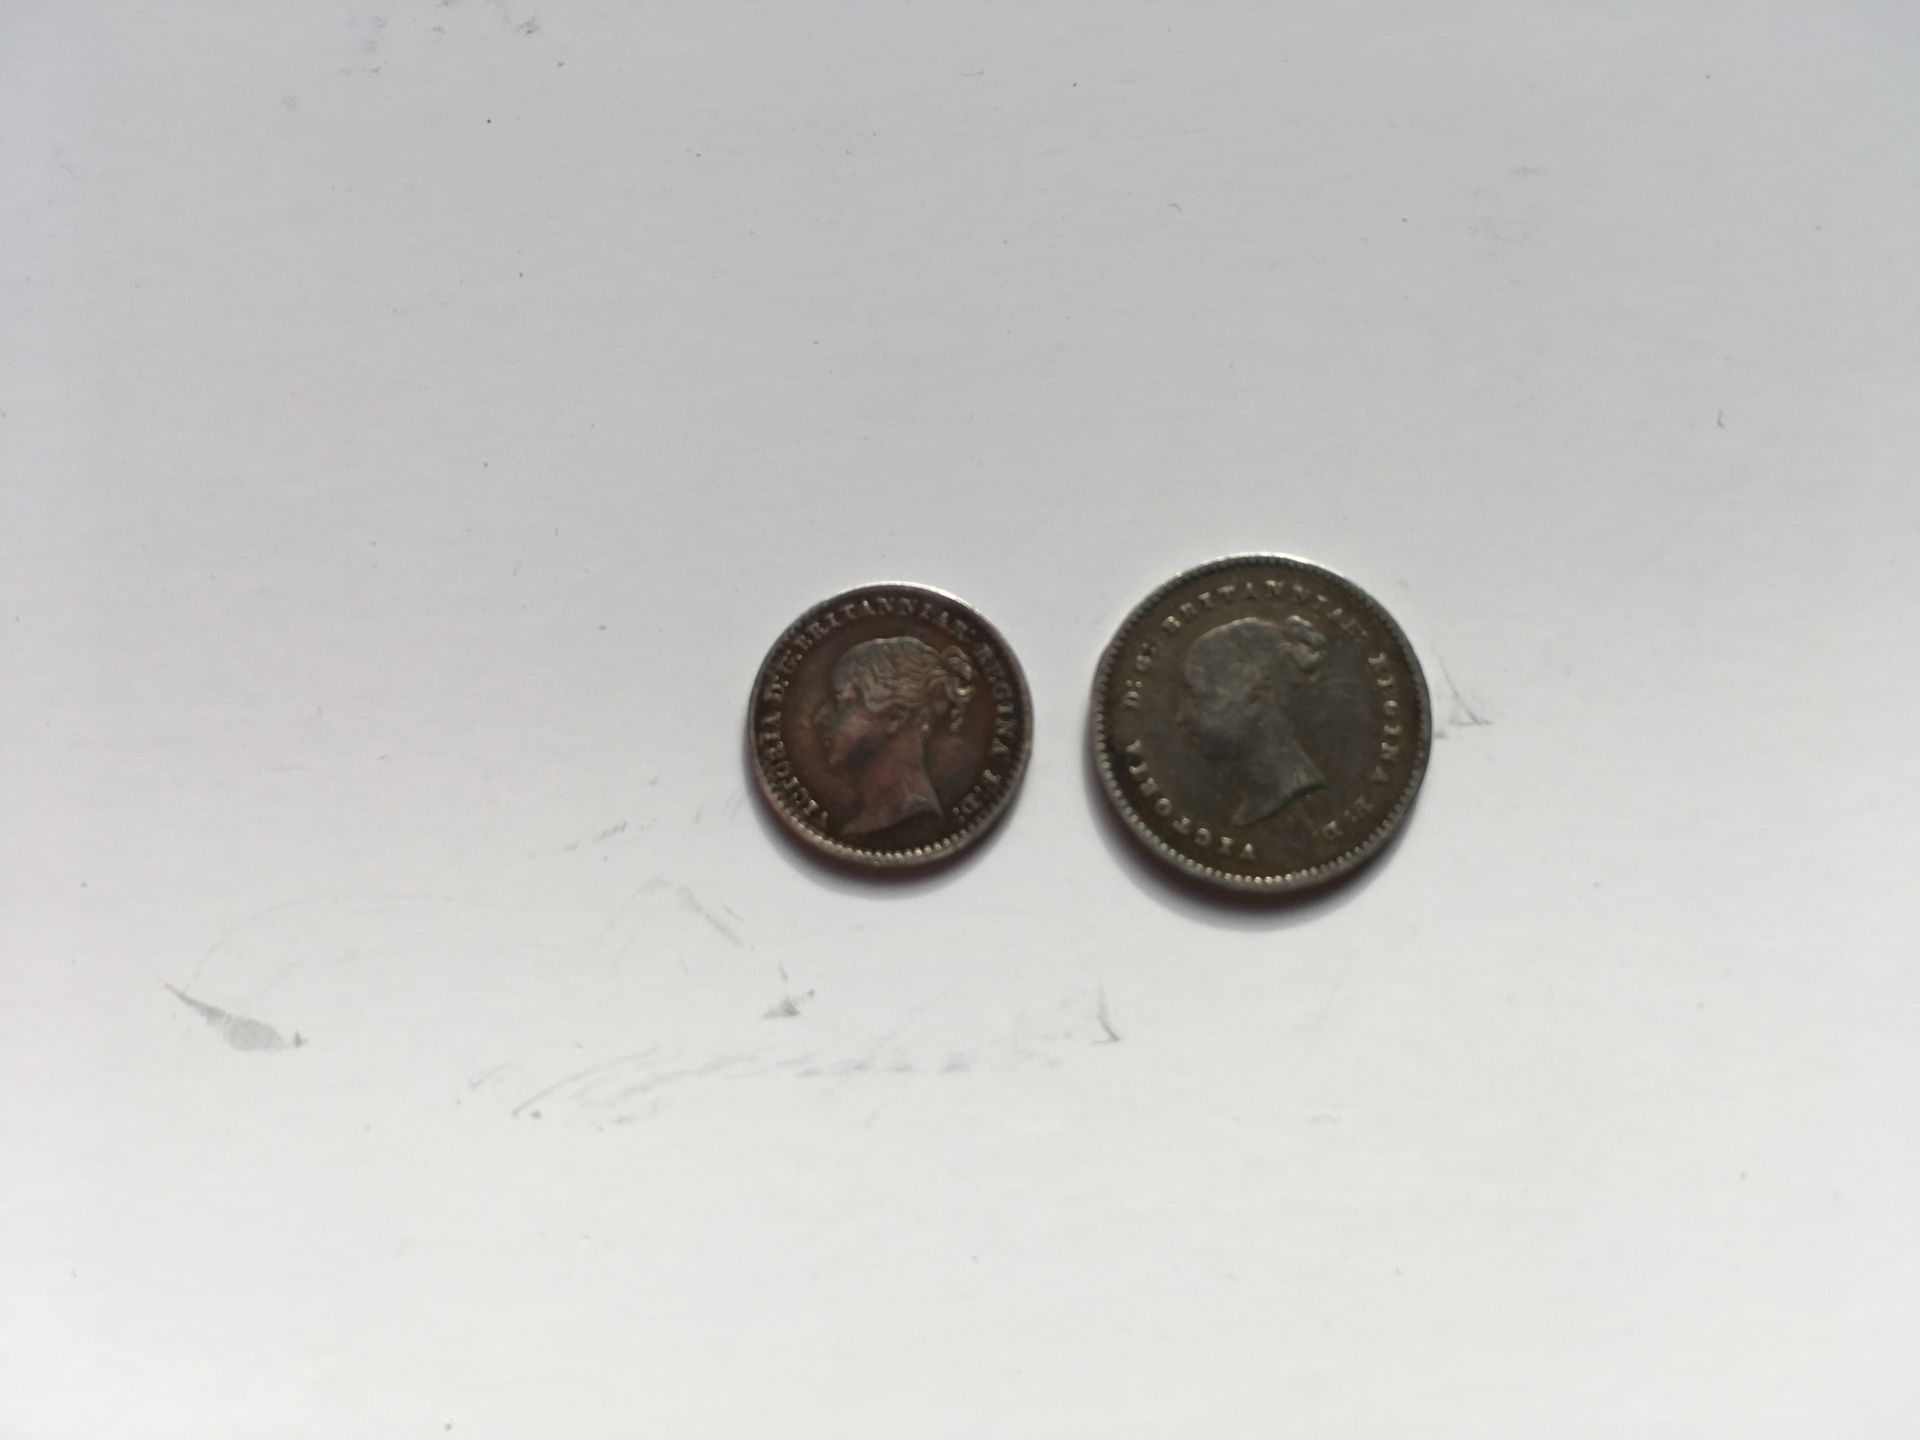 COINS: GB MAUNDY PENNY 1870 AND TWO PENCE 1838. - Image 6 of 8